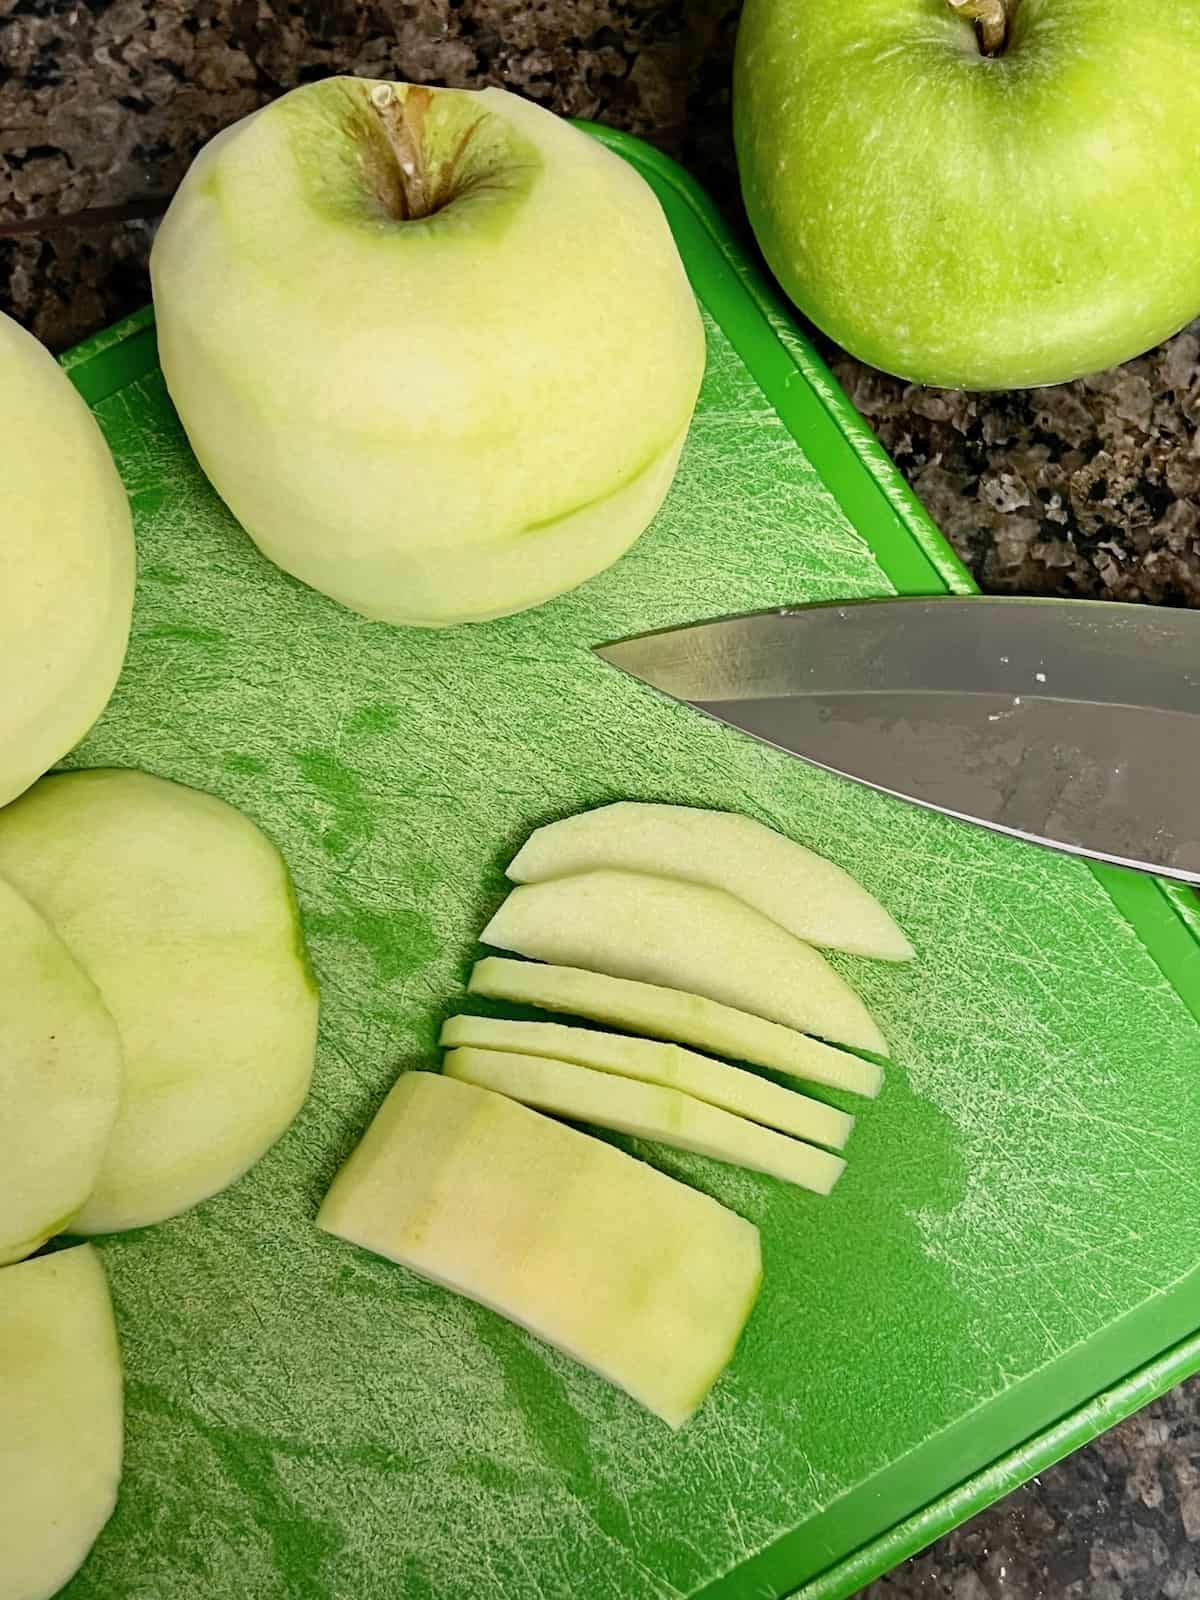 Peeled apples and one in slices on a cutting board.